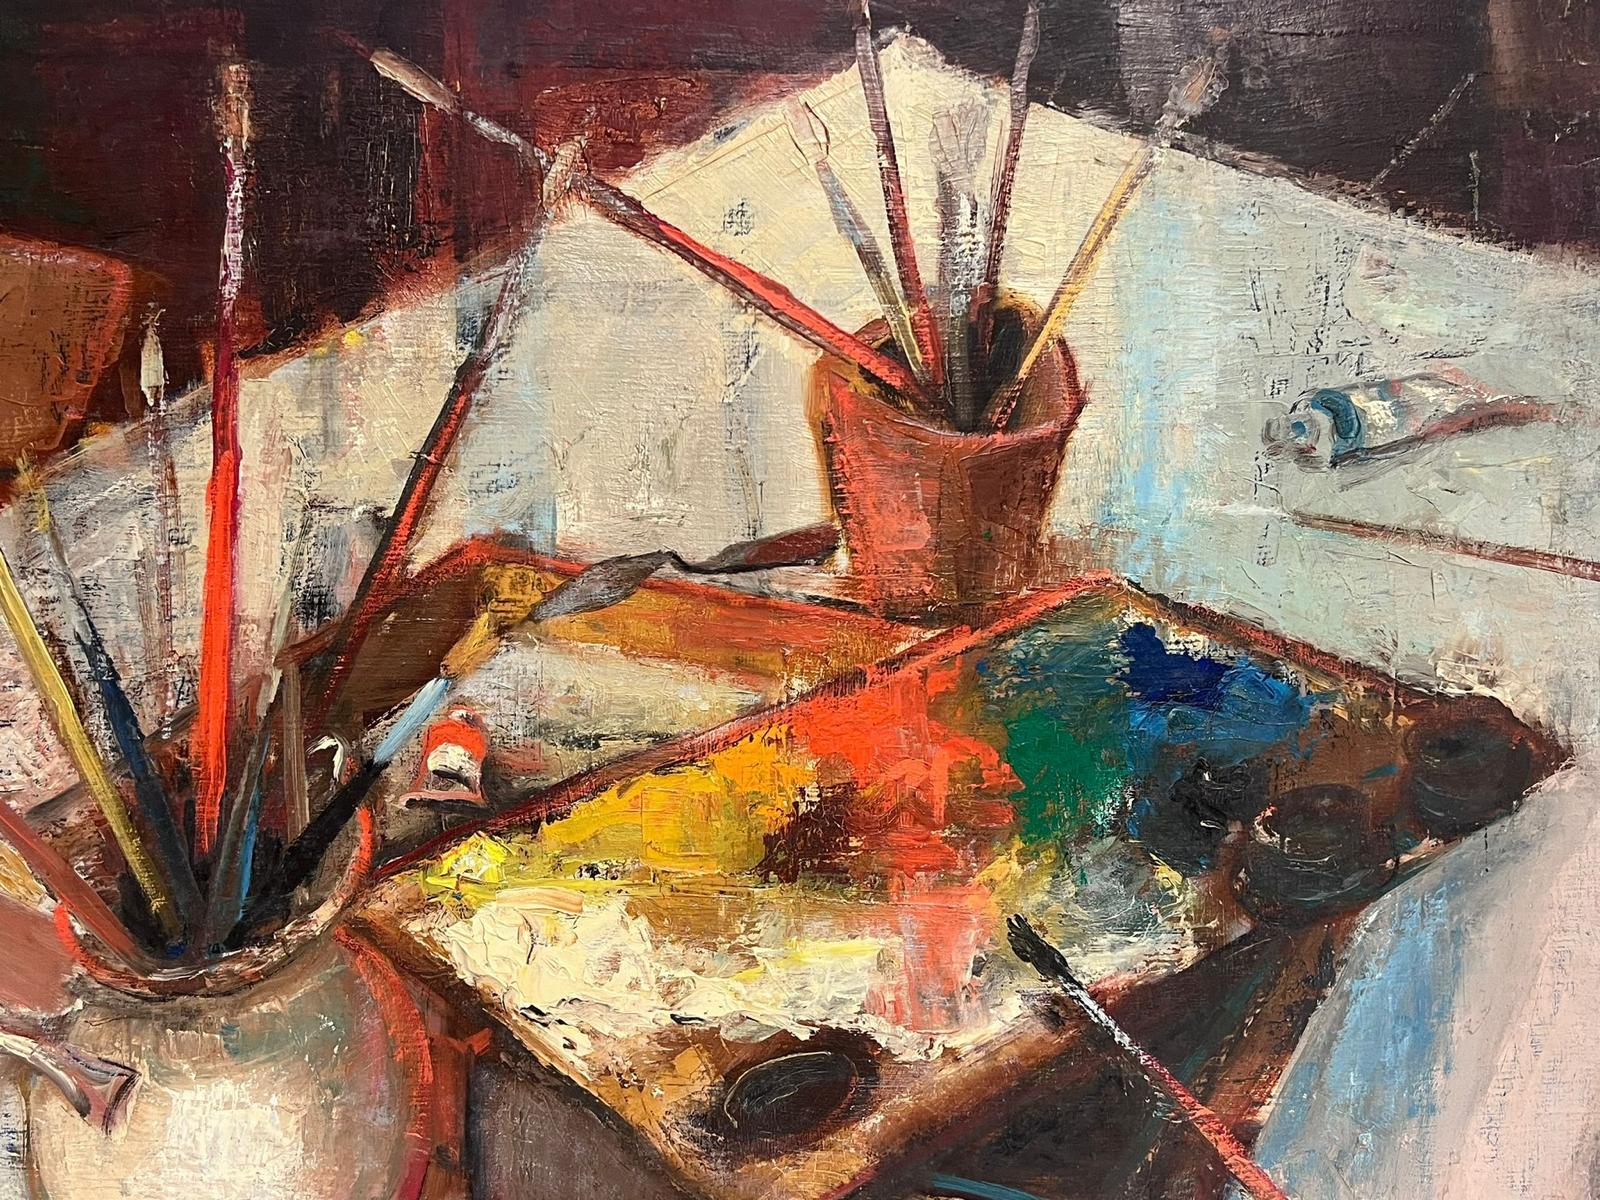 The Artists Studio
by Michel Kritz (French 1925-1994) 
signed oil on board, unframed
board: 23.5 x 32 inches
provenance: private collection, France
condition: very good and sound condition 